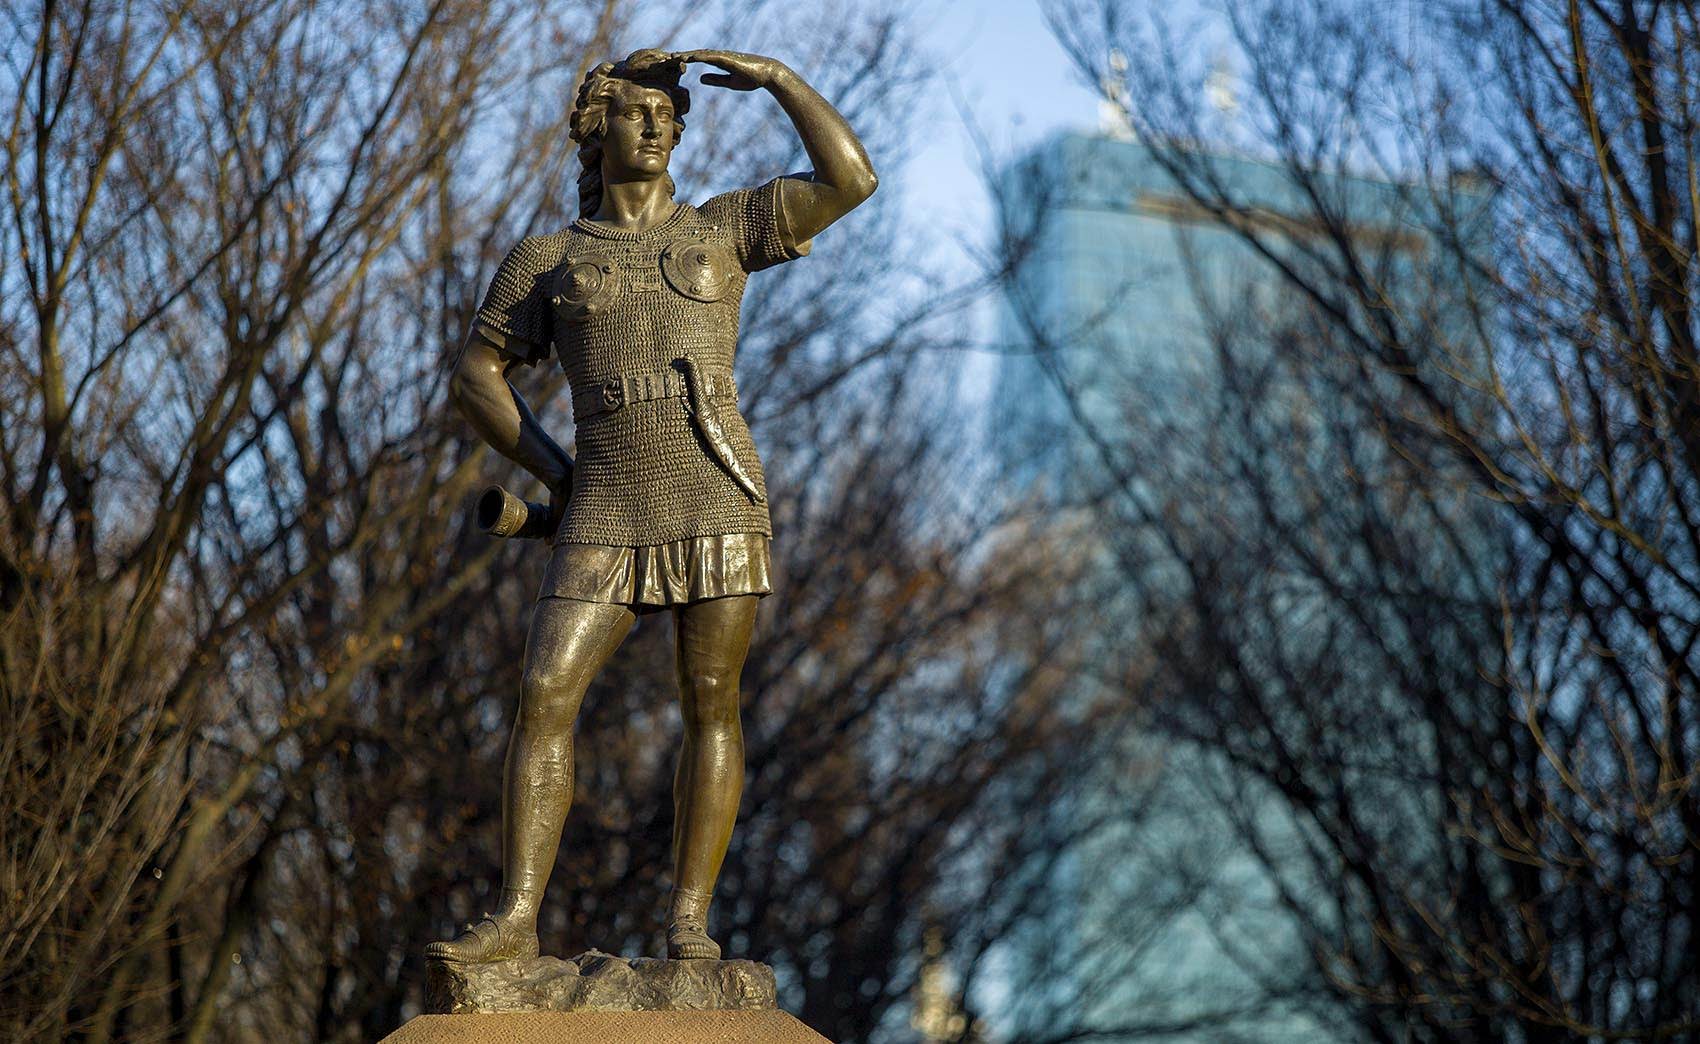 A statue of Leif Erikson looks out across the Muddy River in Charlesgate Park, Boston. (Robin Lubbock/WBUR)